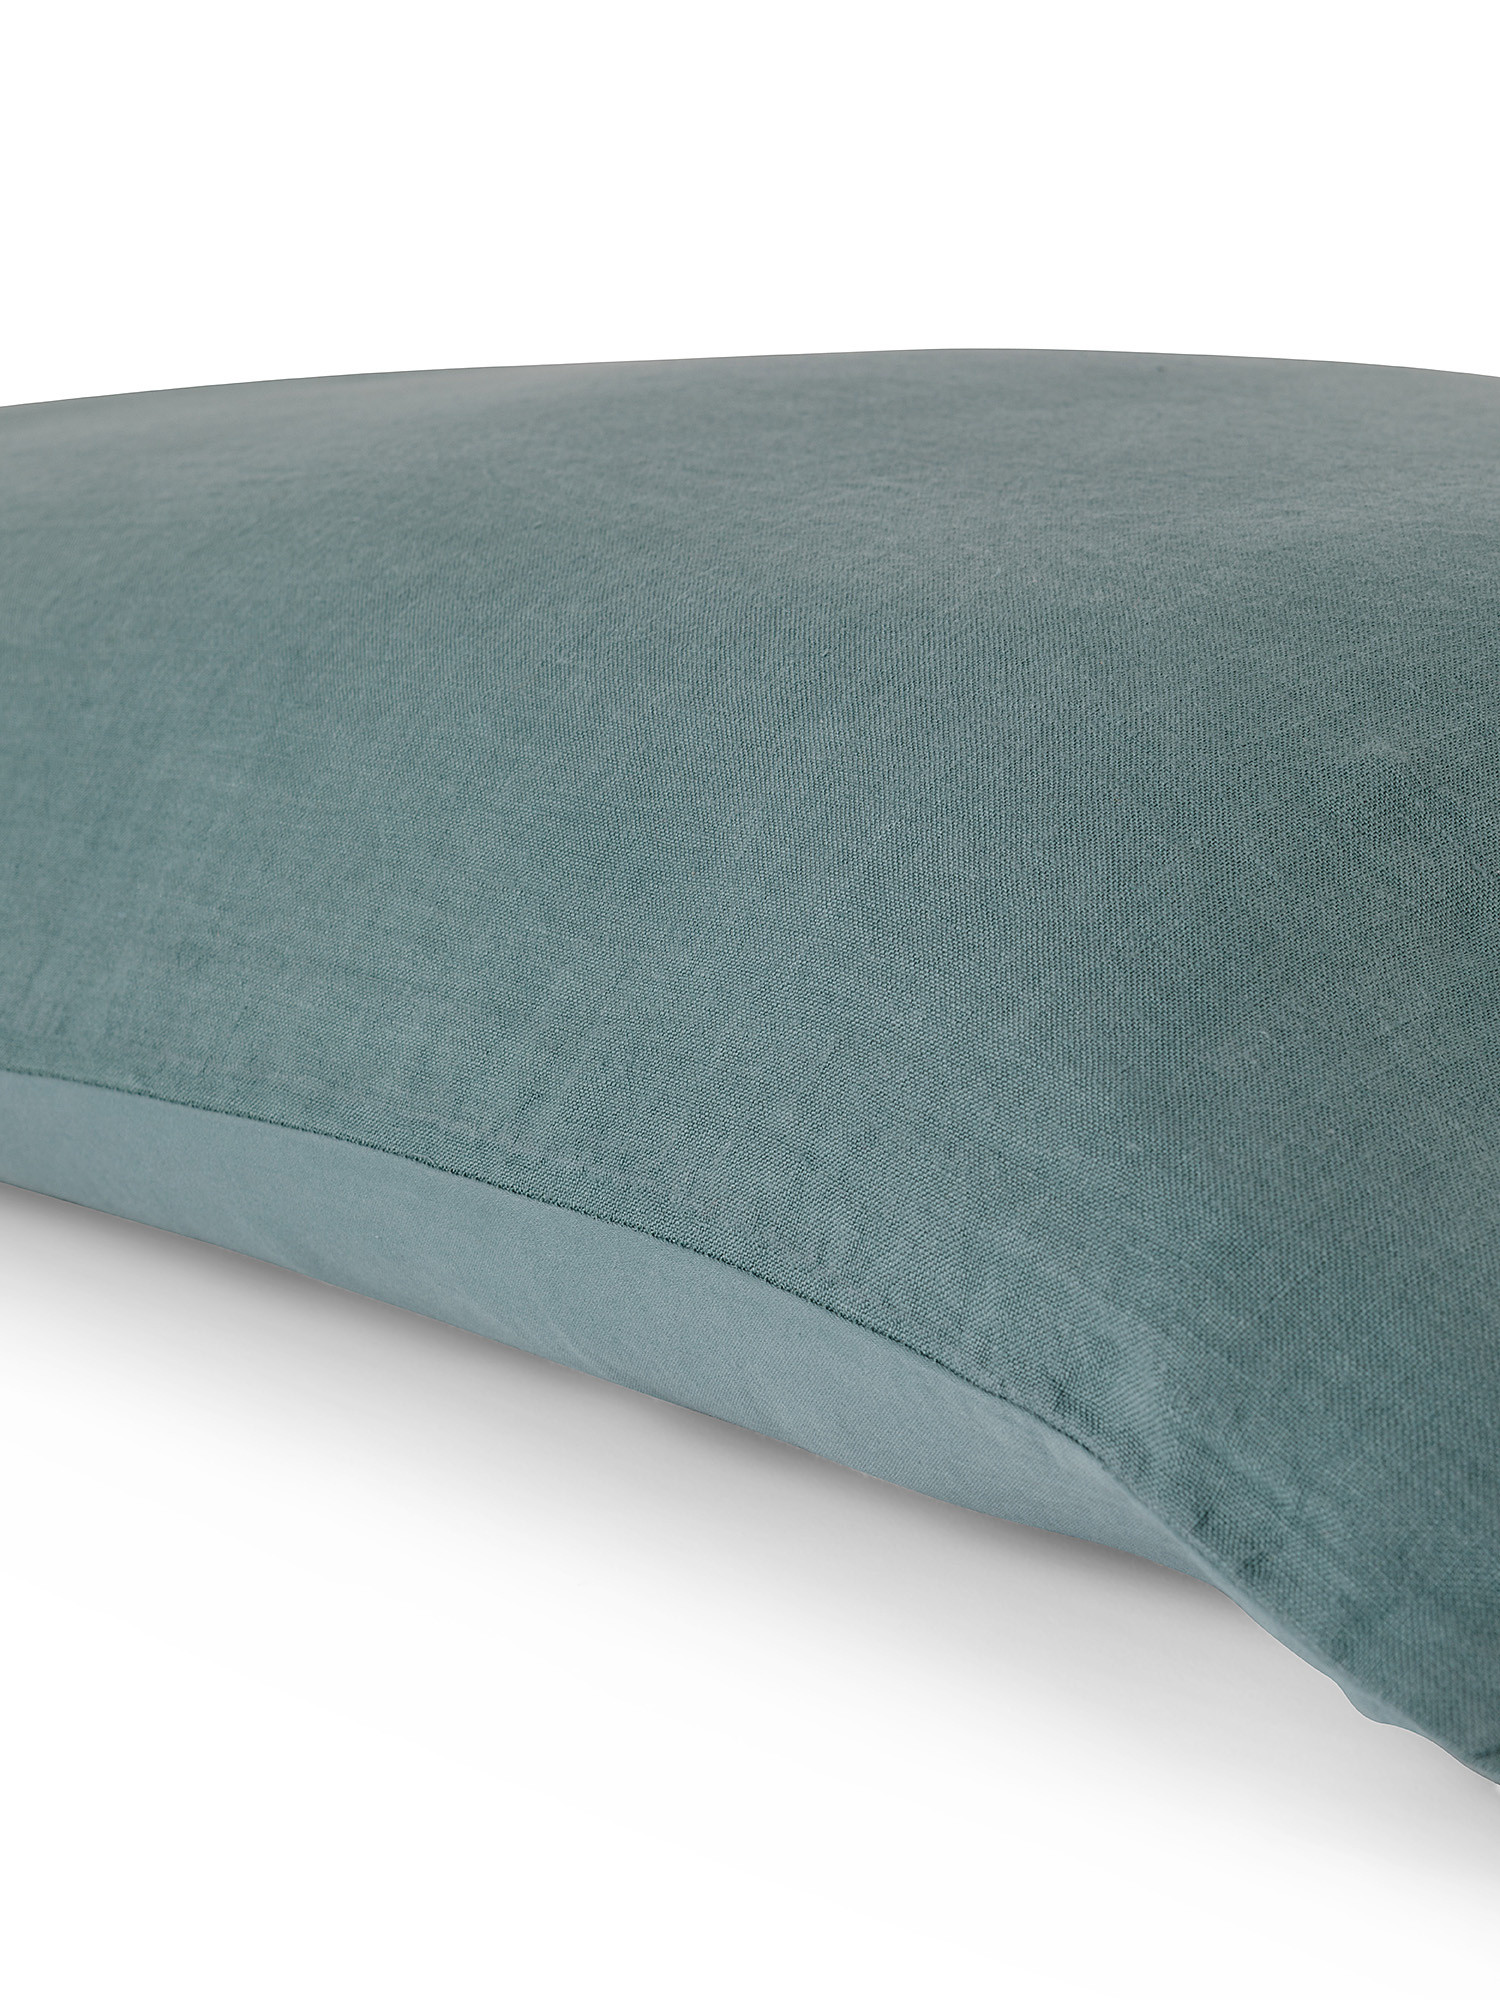 Zefiro plain color linen and cotton pillowcase, Green, large image number 1